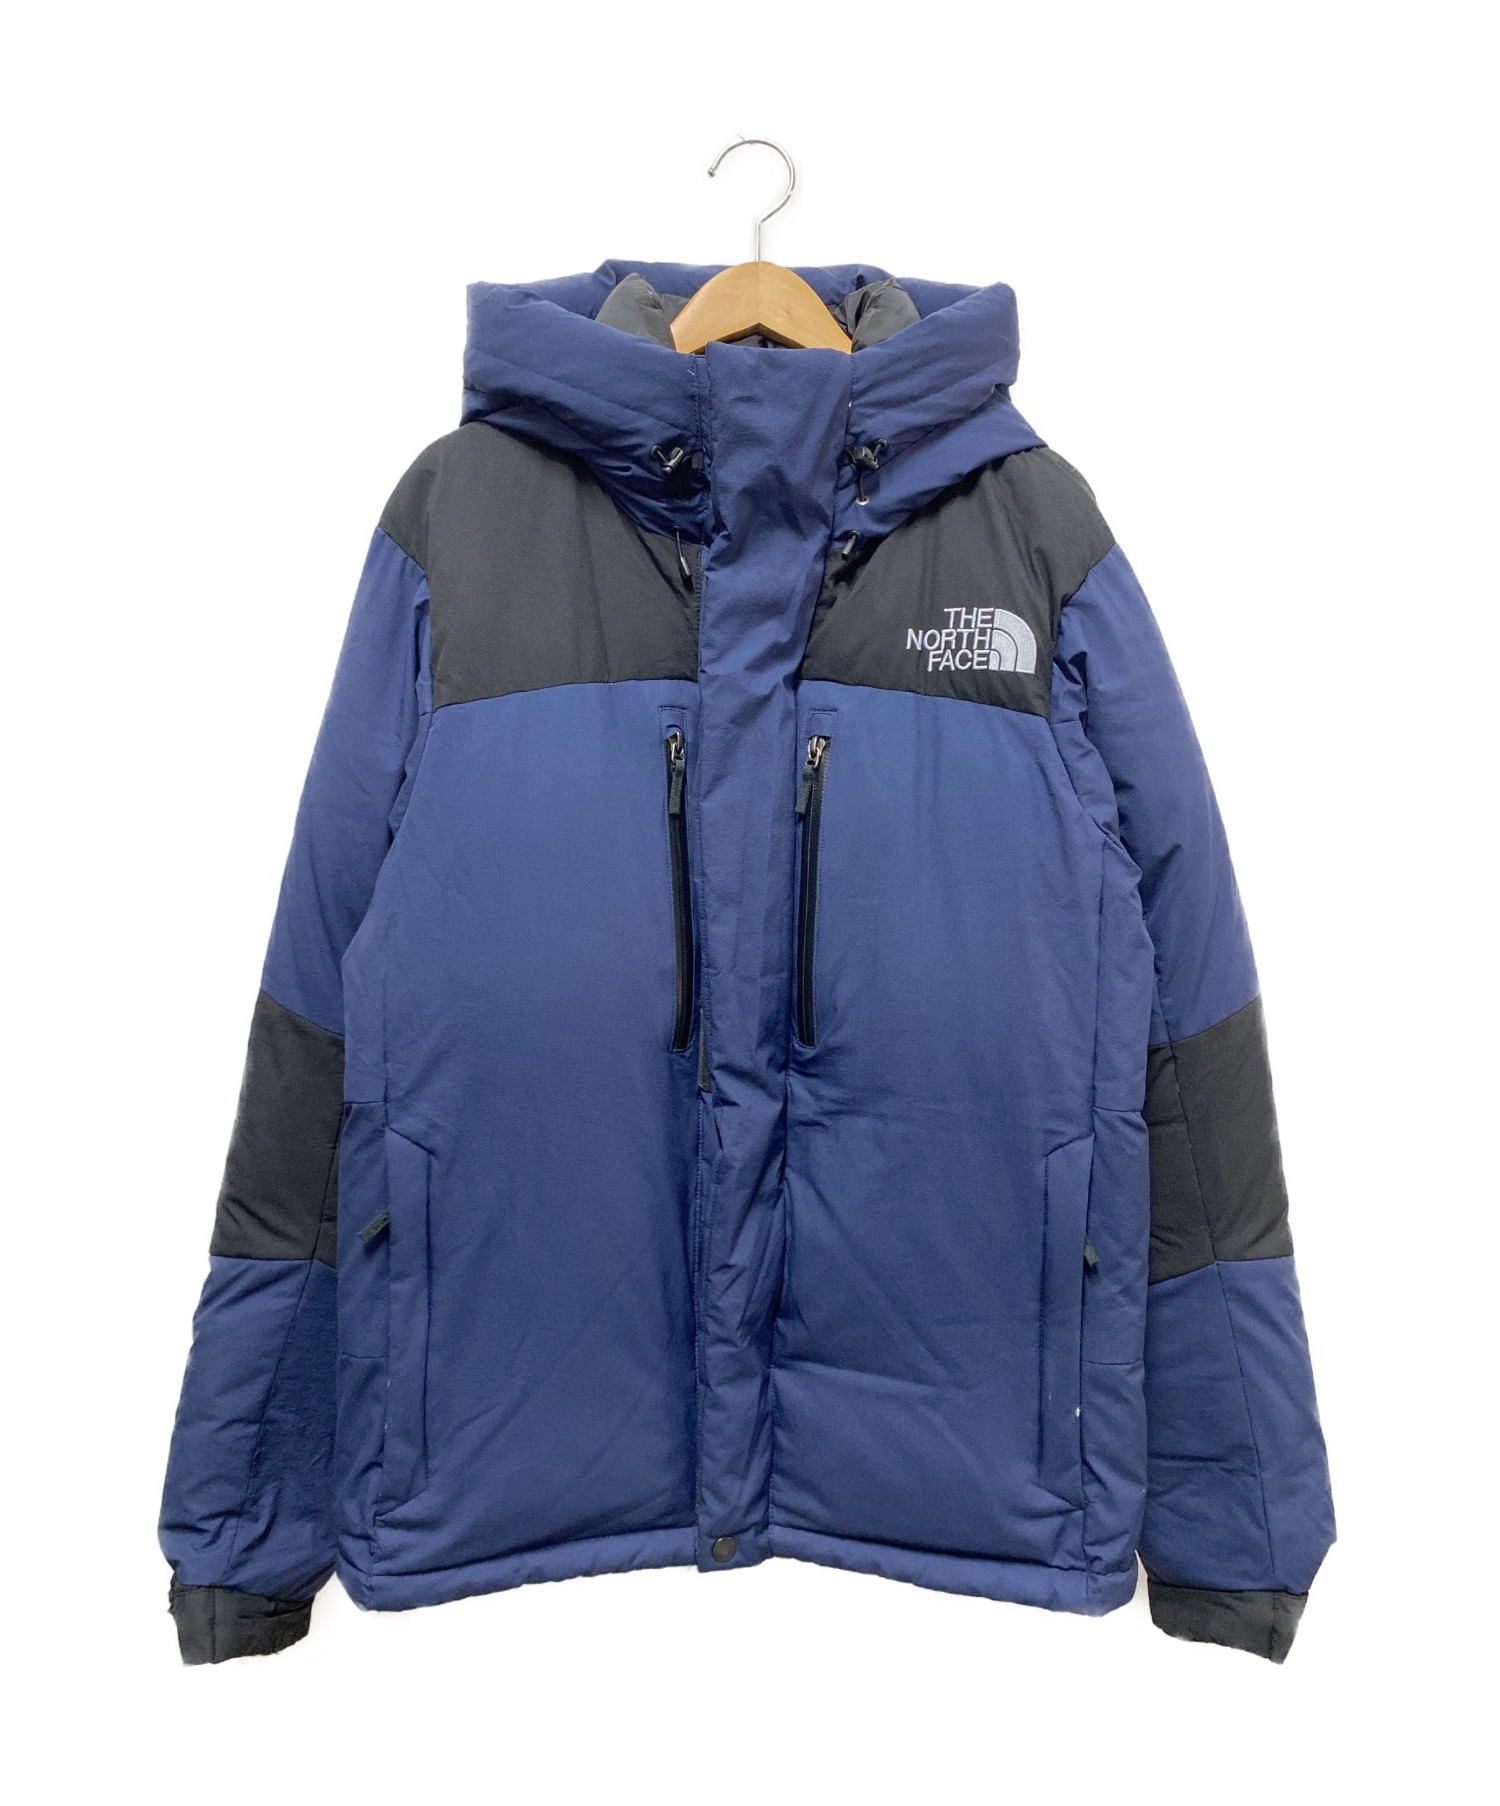 THE NORTH FACE - NORTH FACE バルトロライトジャケット サミット